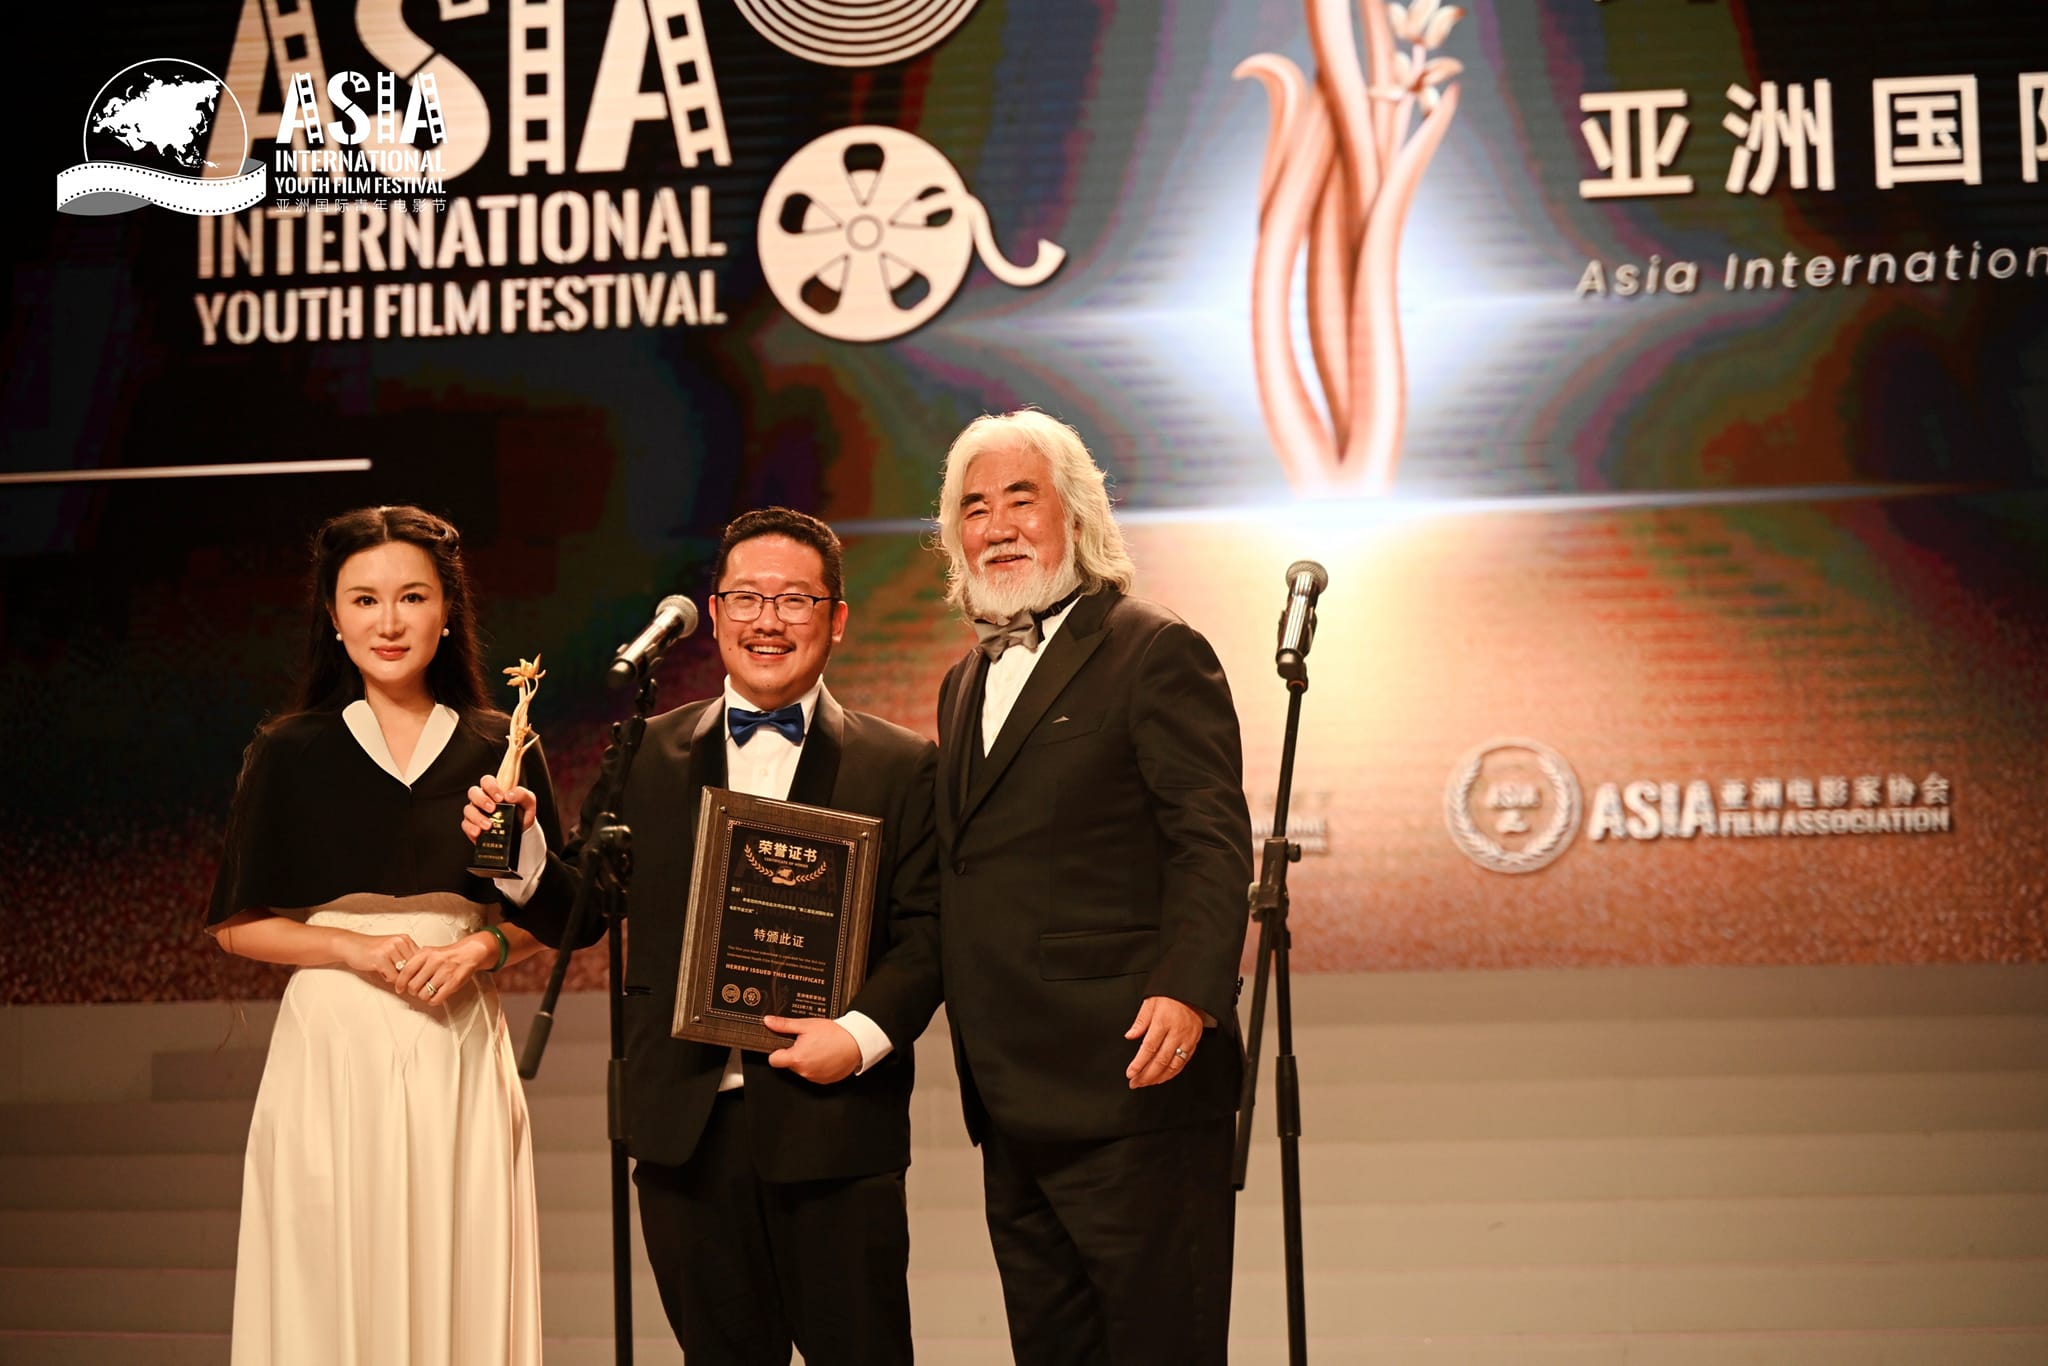 Don Hoe's Film 'Returning Home 英雄回家' Triumphs at AIYFF, Making Malaysia Proud Image